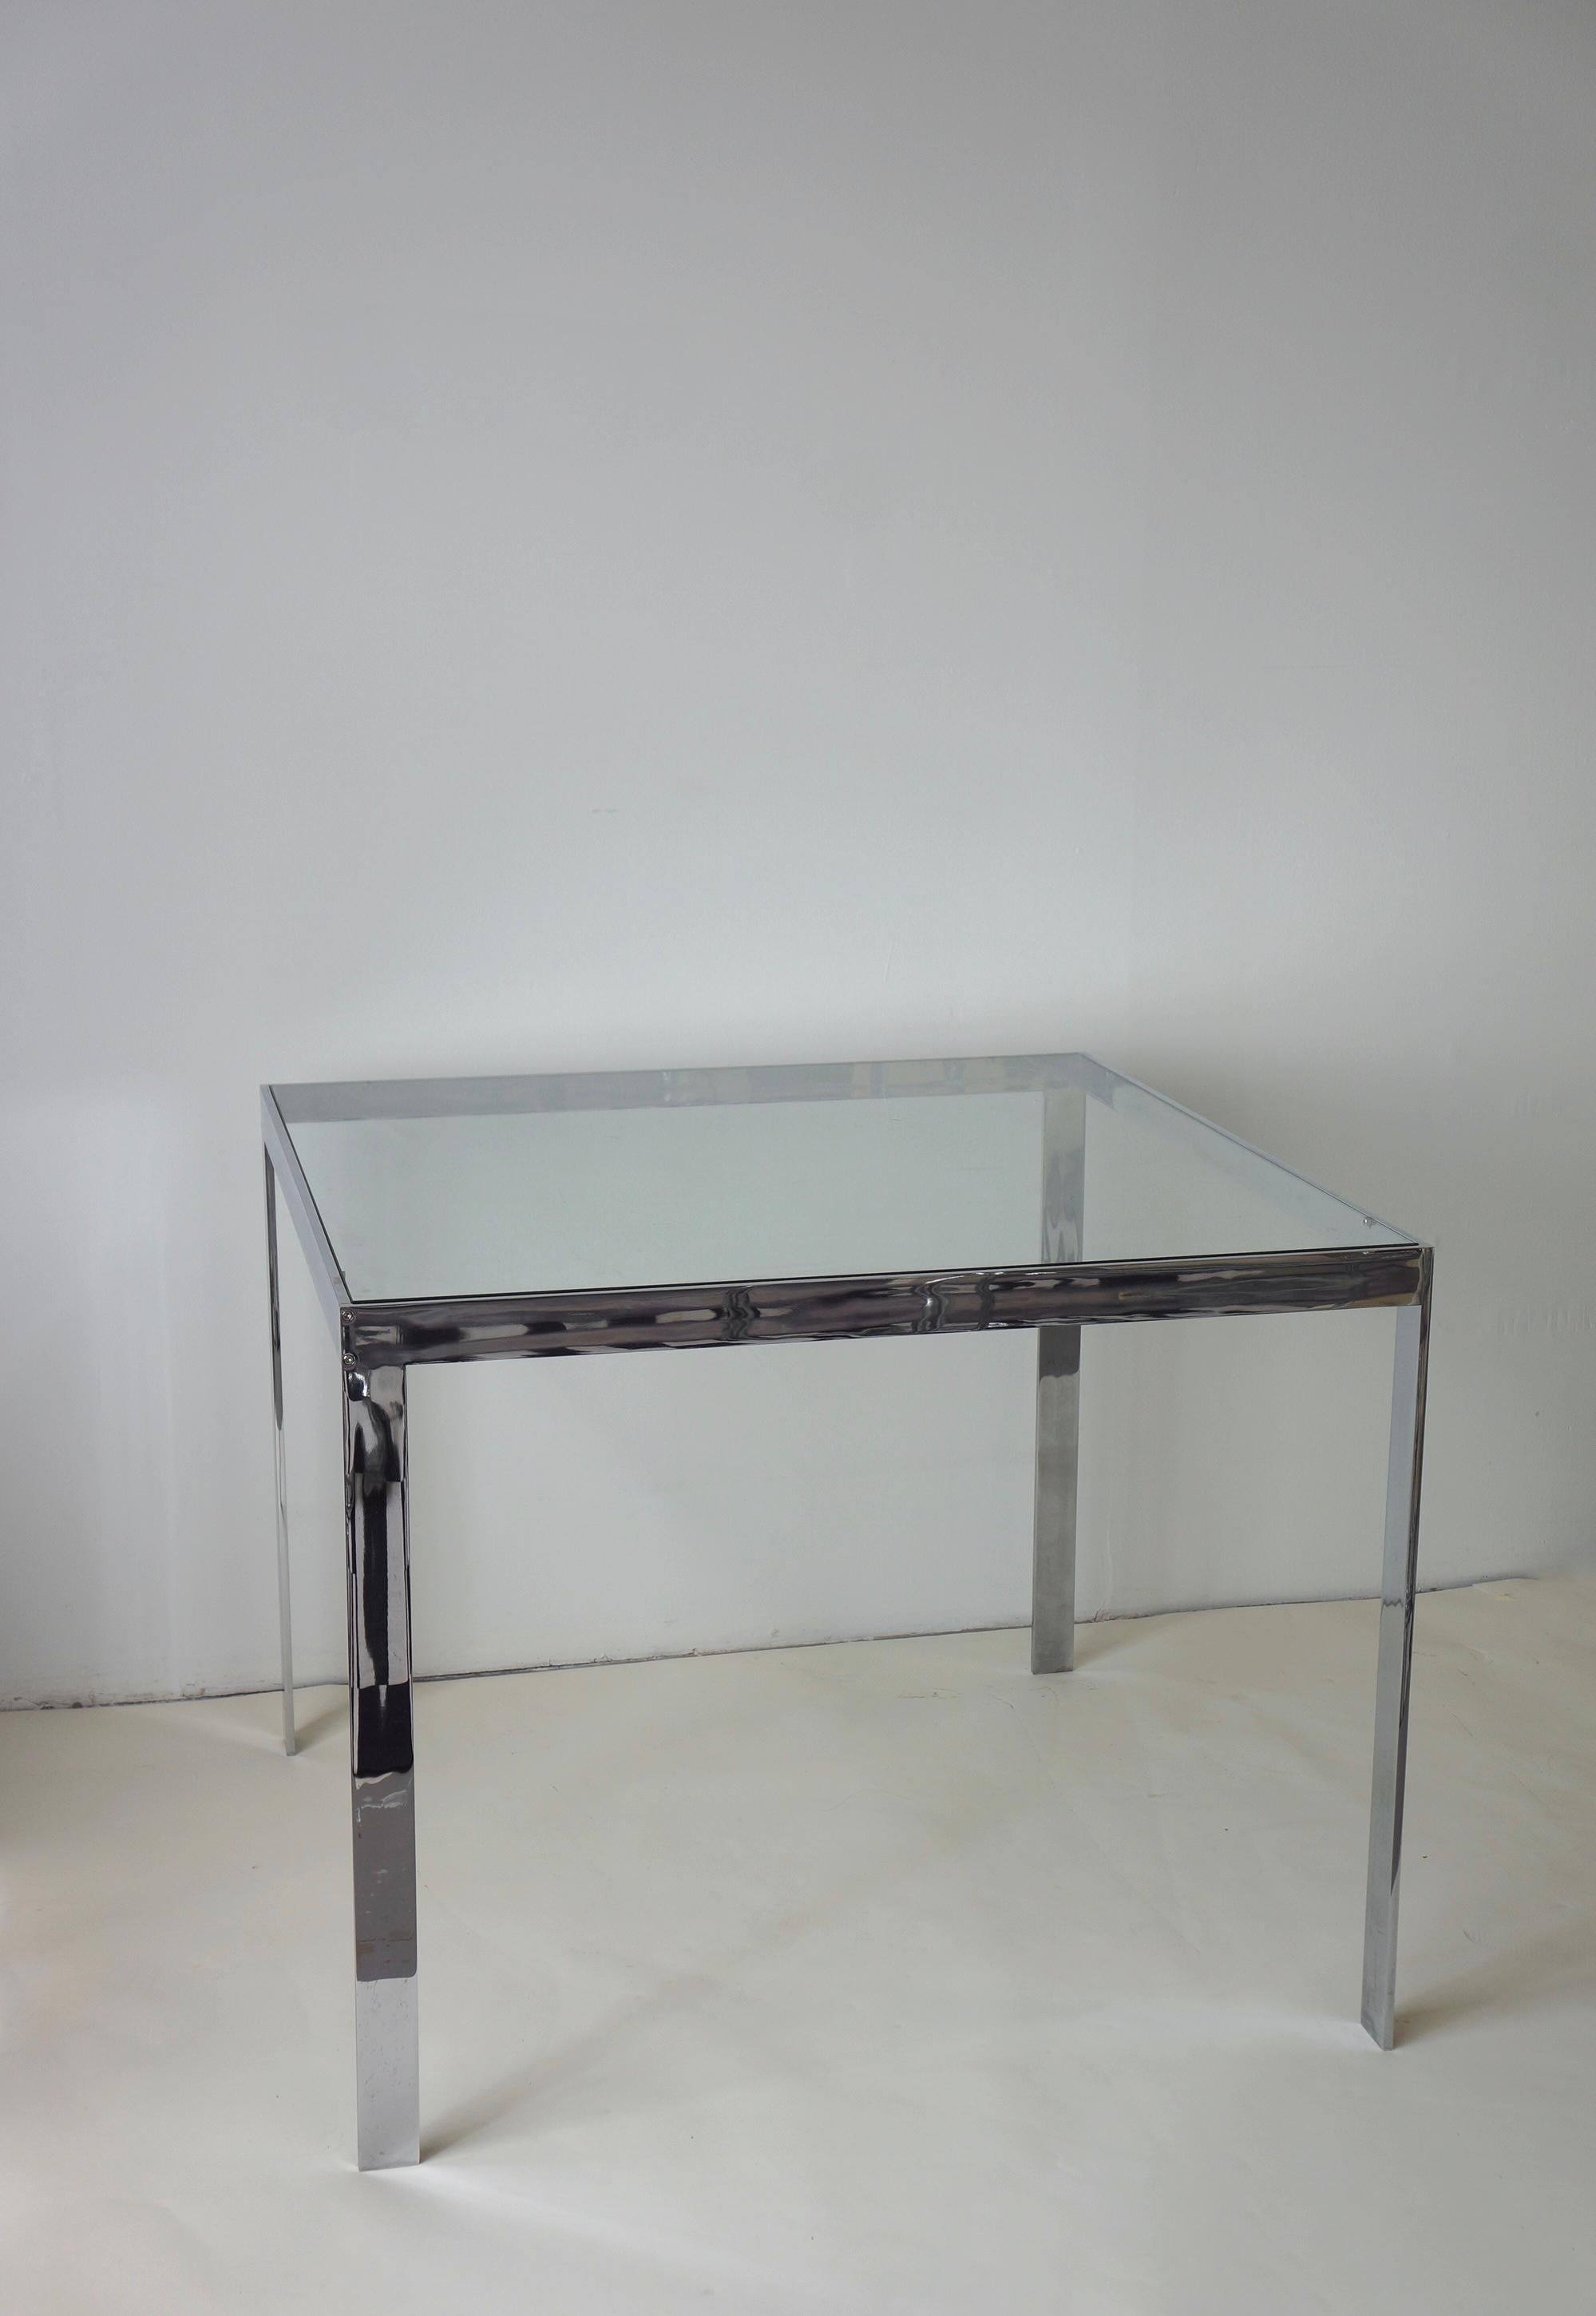 Elegant chrome and glass square dining table. It was made in the 1970s. This minimal piece is in line with the design of the time. The refined solid chromed body is constructed seamlessly. The sleek and minimal lines of the chrome are constructed to